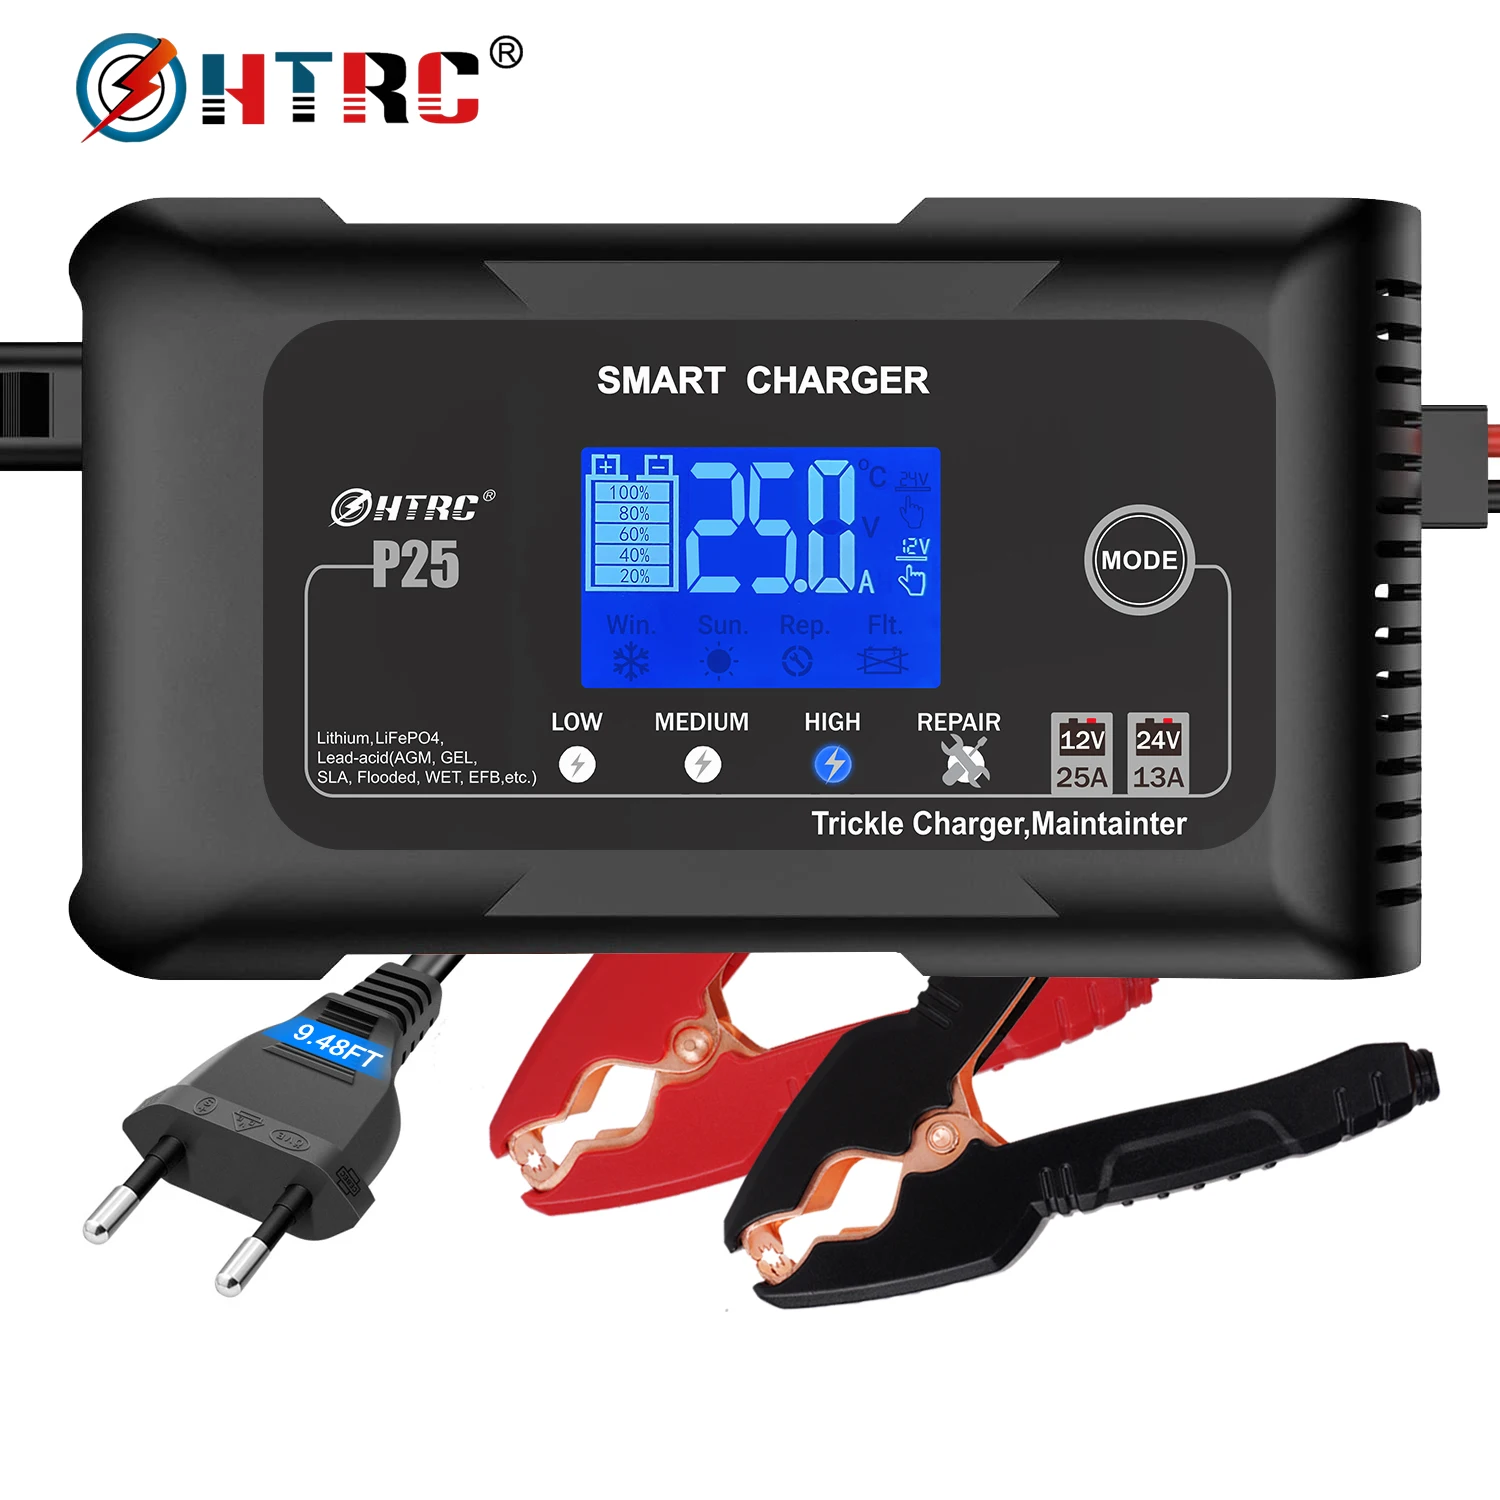 

HTRC 12V 25A 24V 13A Car Auto Battery Charger Automatic Power Puls Repair for Truck Motorcycle Lead Acid Lifepo4 AGM GEL Lithium